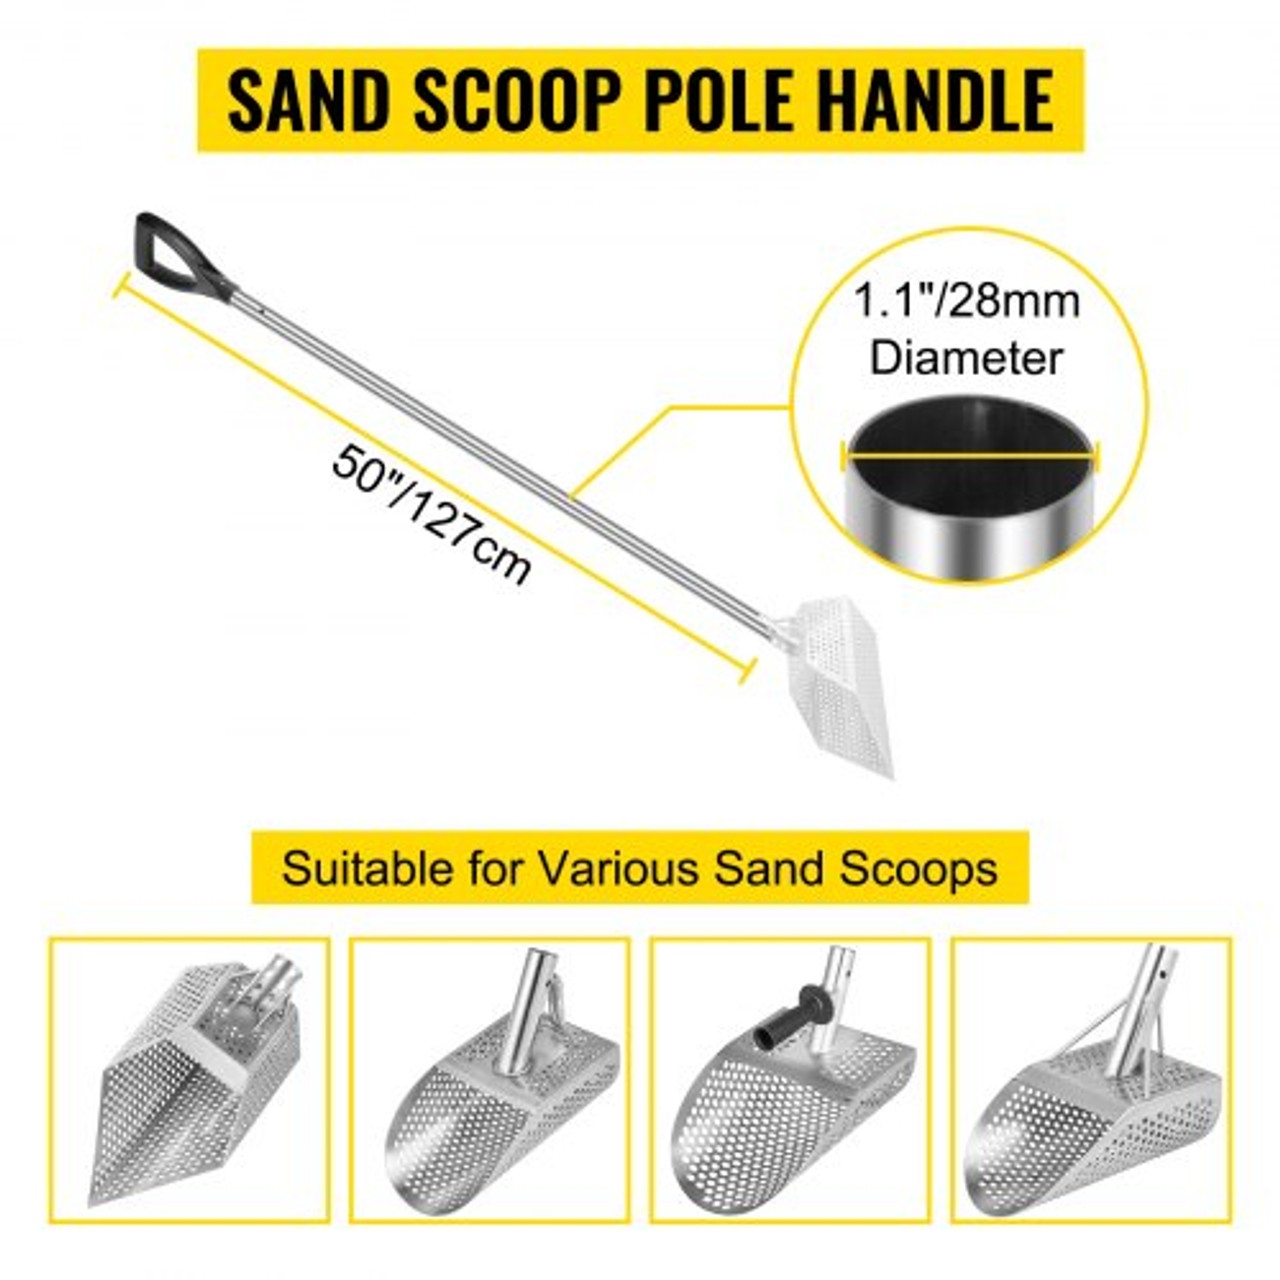 Sand Scoop Pole Handle, Stainless Steel Sand Scoop Long Pole